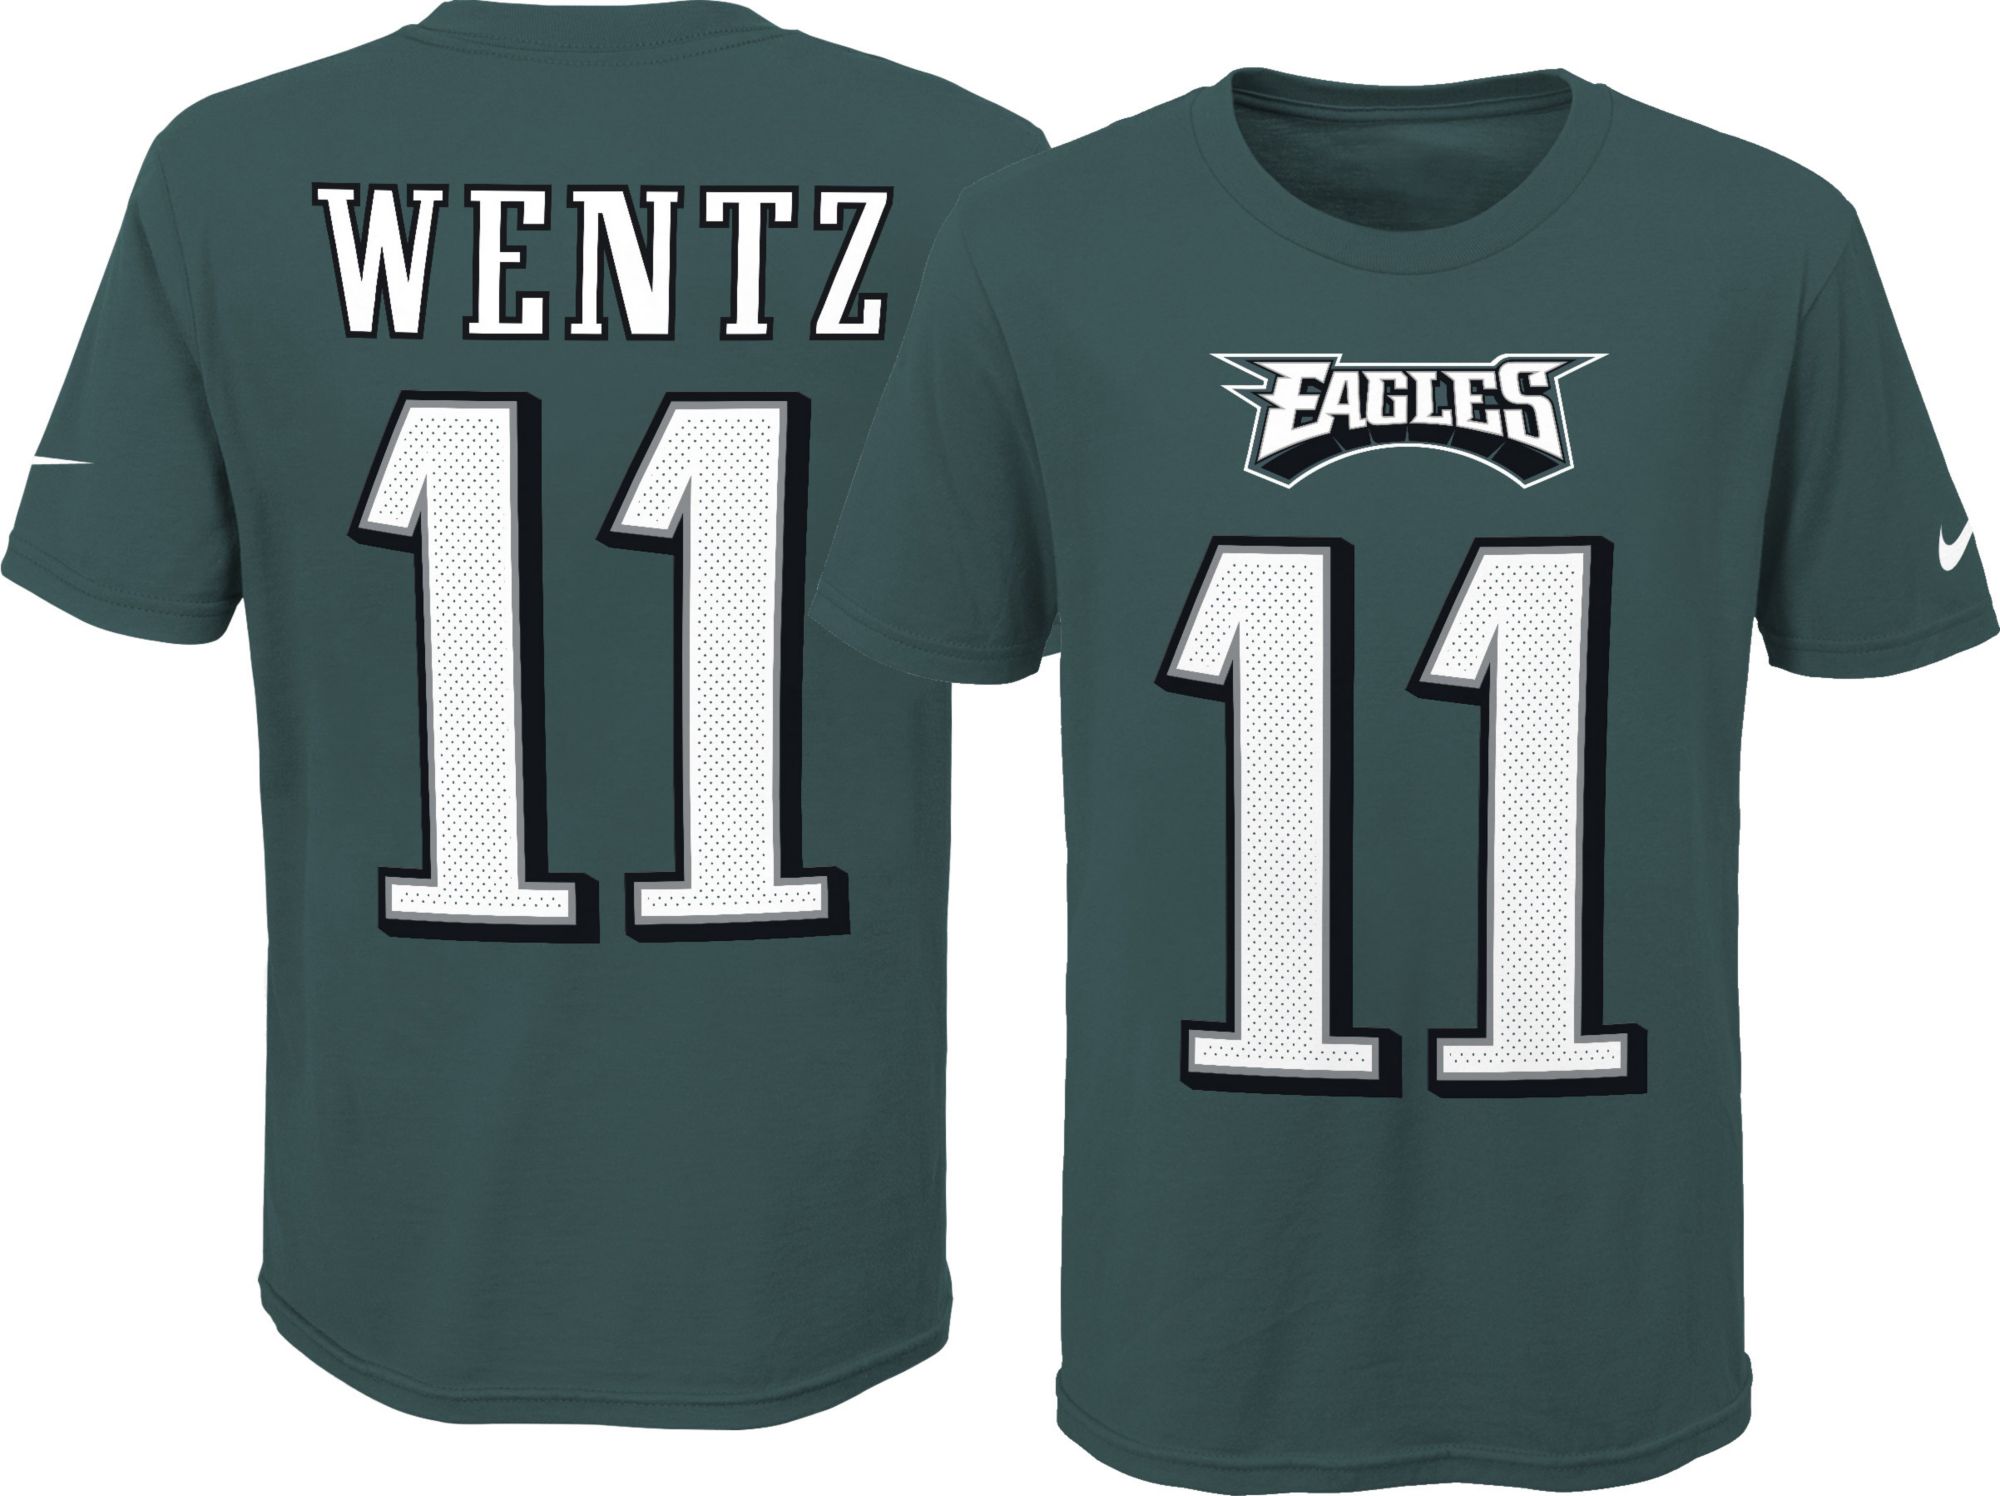 dicks sporting goods eagles jersey